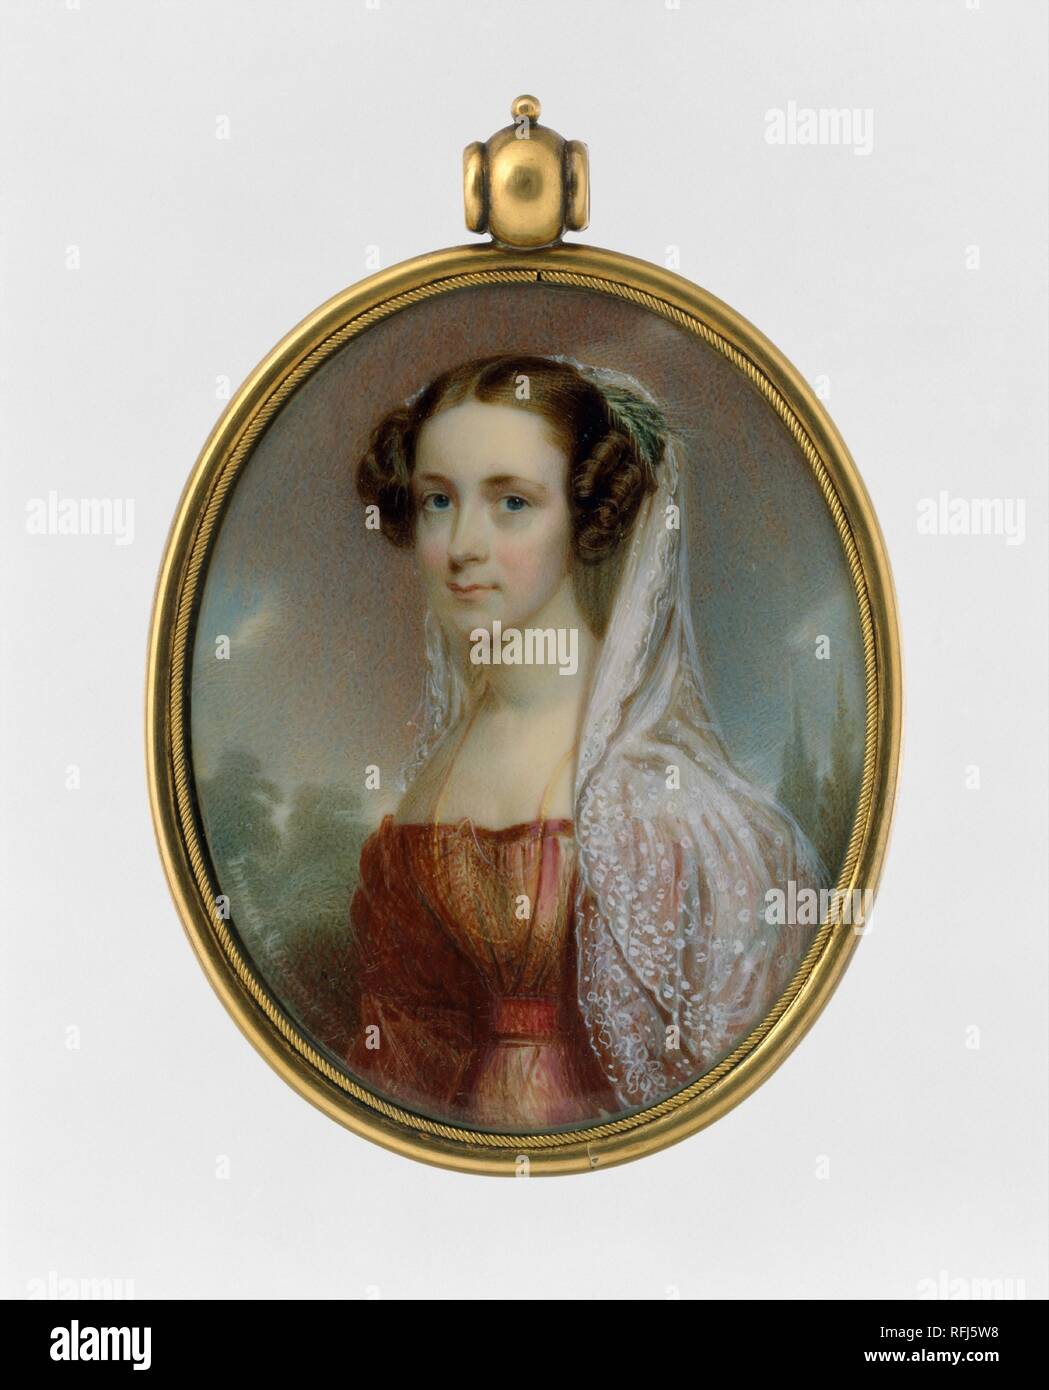 Portrait of a Lady. Artist: Henry Inman (American, Utica, New York 1801-1846 New York); Thomas Seir Cummings (American (born England), Bath 1804-1894 Hackensack, New Jersey). Dimensions: 3 x 2 in. (7.6 x 5.1 cm). Date: ca. 1827.  Inman and Cummings made miniatures together for a short time (1825-27). The works on which they collaborated are very fine and exceedingly rare, and rank among the most stunning American miniatures produced in the nineteenth century. The present work features Inman's elaborate and highly finished technique and Cummings's minute detailing. Museum: Metropolitan Museum o Stock Photo